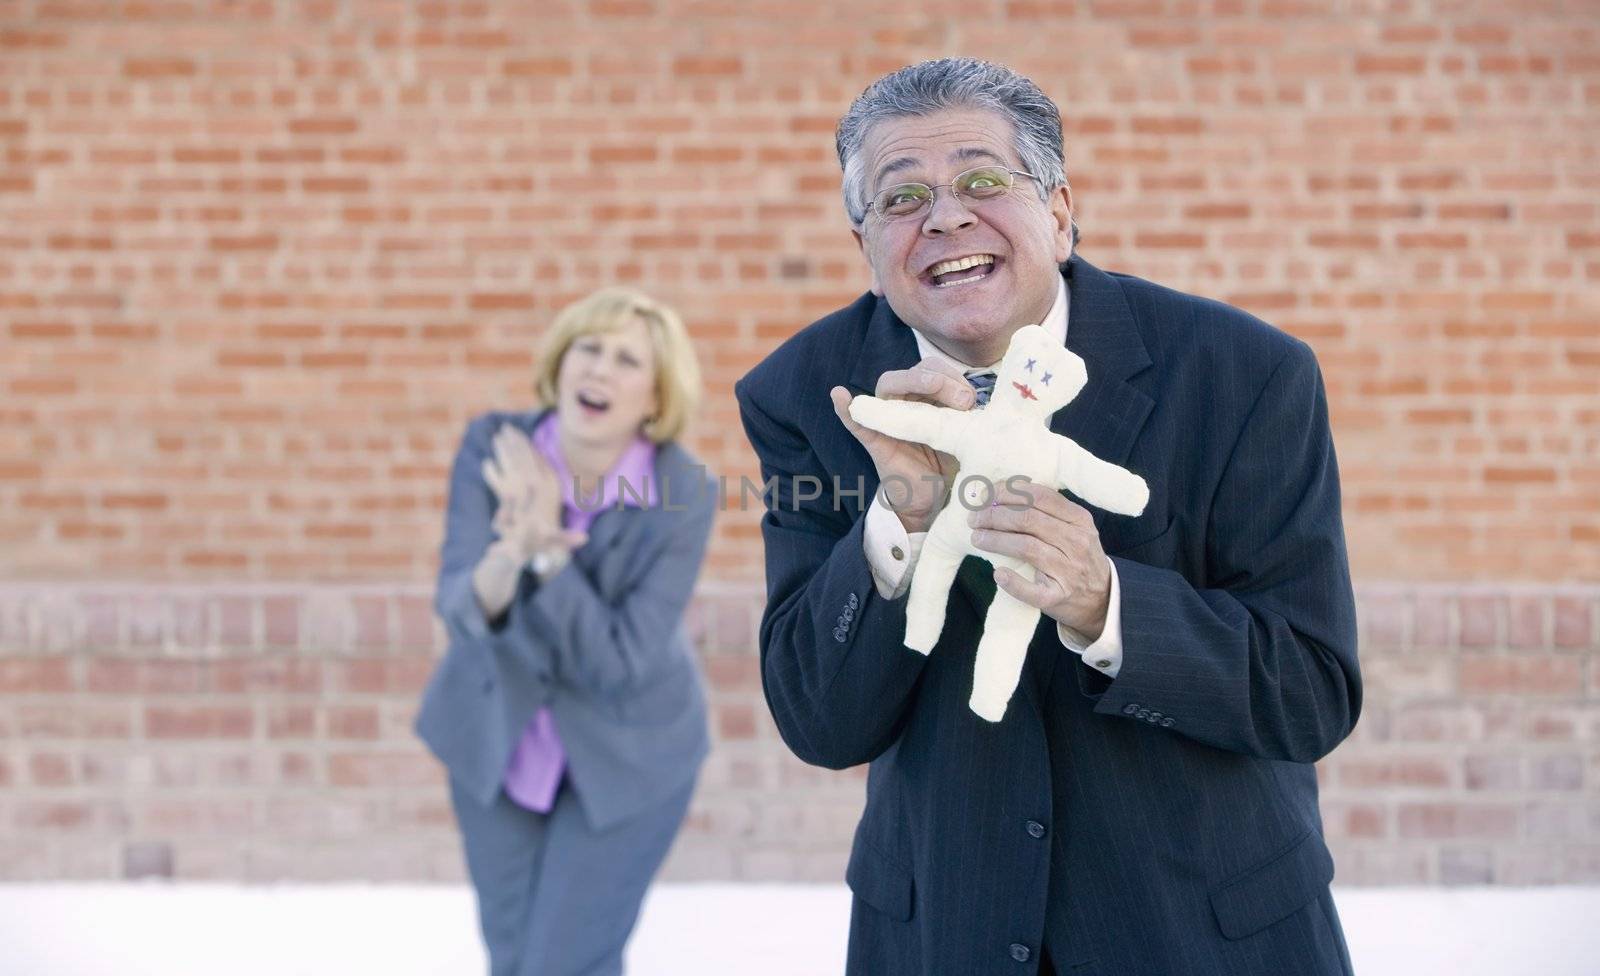 Executive pokes a pin into a Voddoo doll representing her boss or coworker